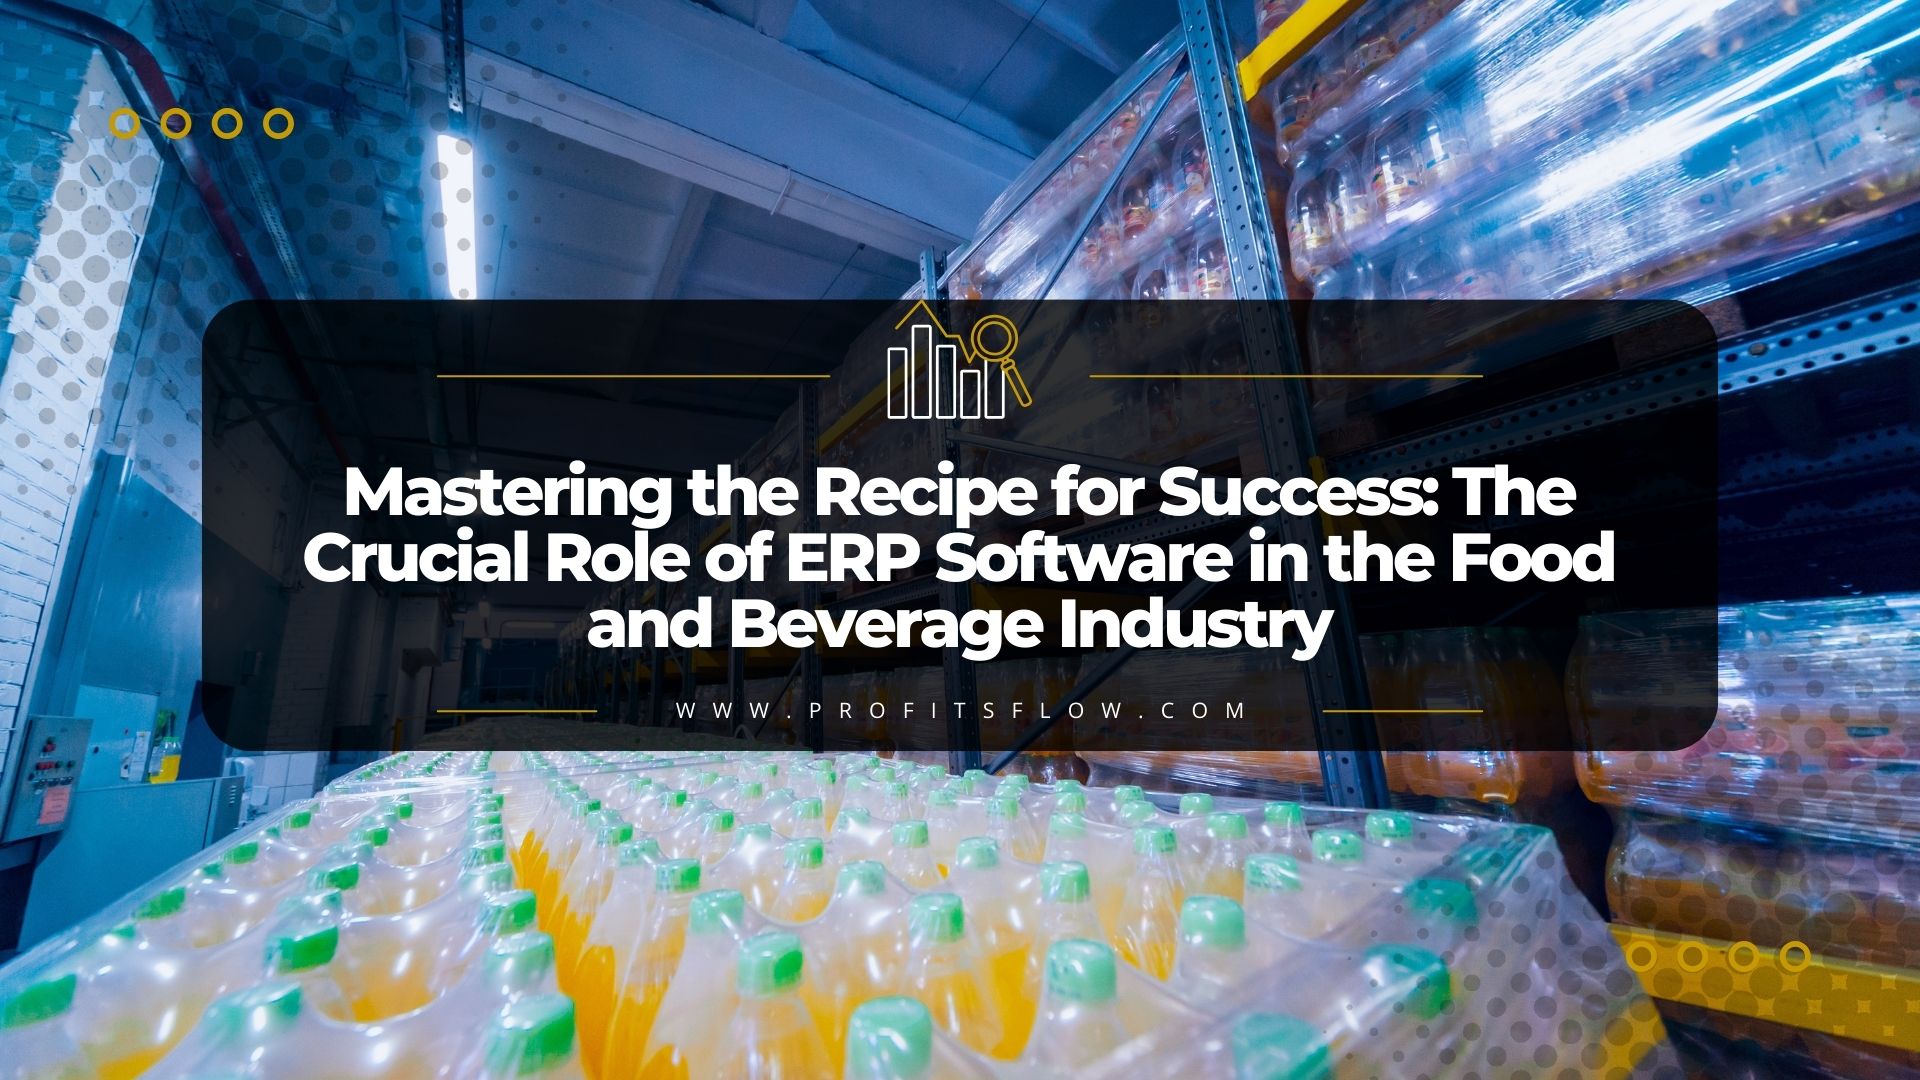 Mastering the Recipe for Success: The Crucial Role of ERP Software in the Food and Beverage Industry